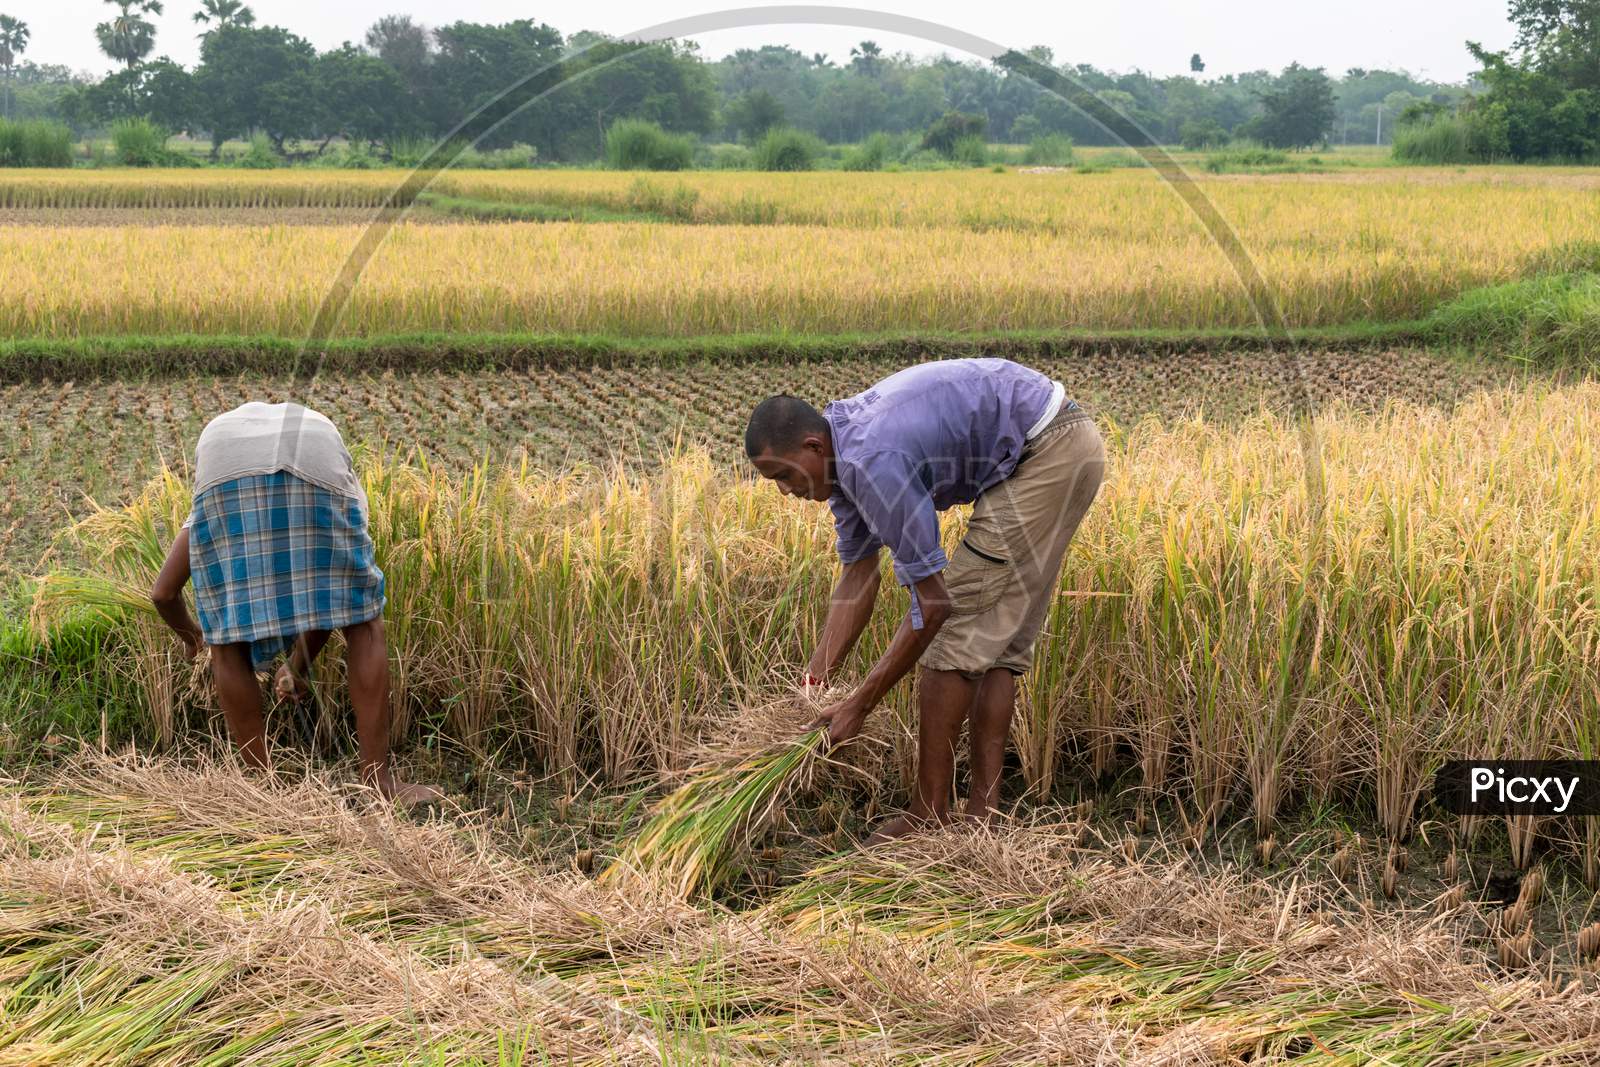 Poor farmers of west bengal harvesting rice in a rice field in India